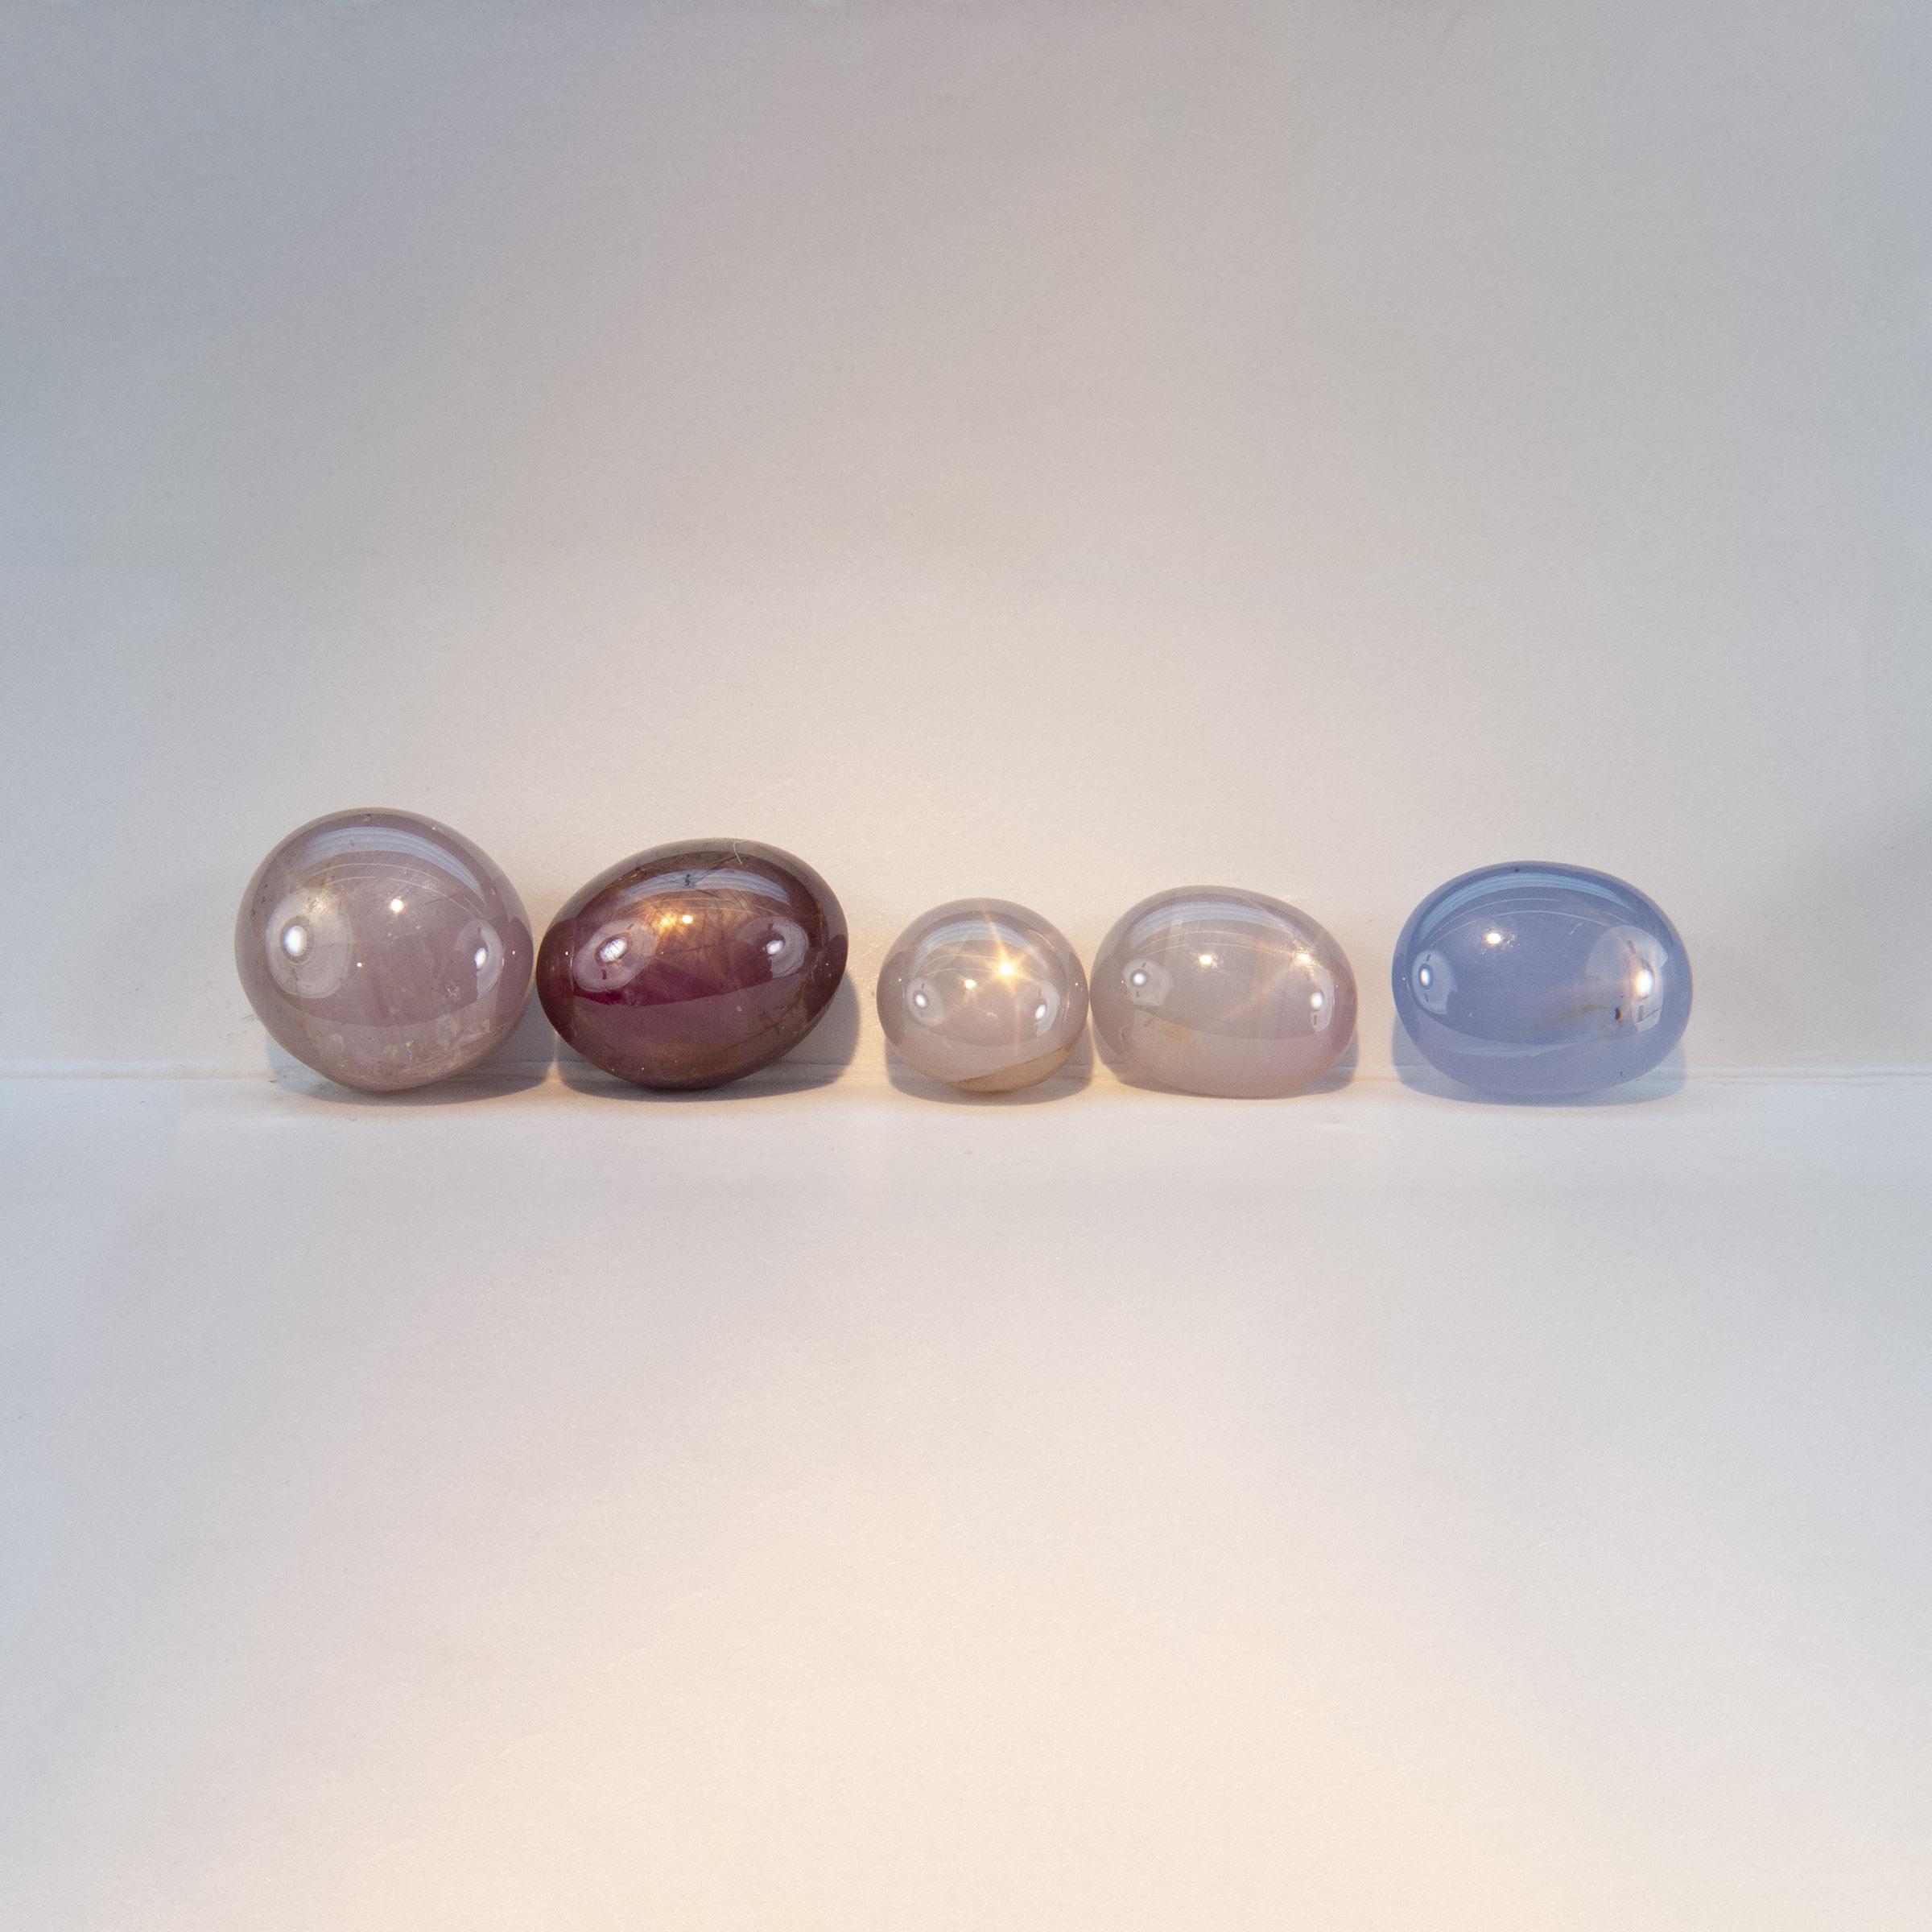 5 Oval Star Ruby And Sapphire Cabochons